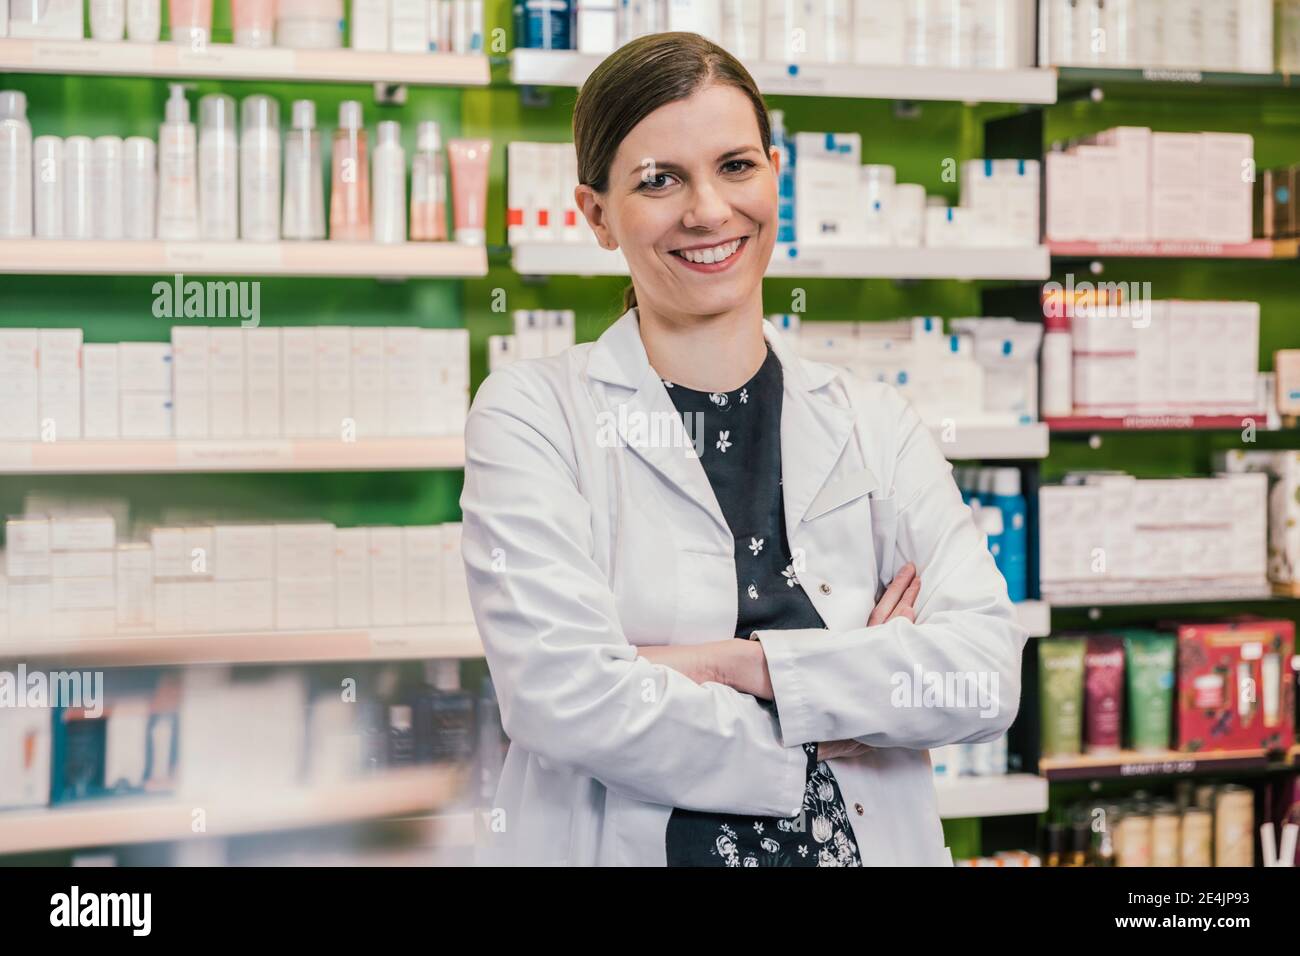 Smiling pharmacist with arms crossed in chemist shop Stock Photo